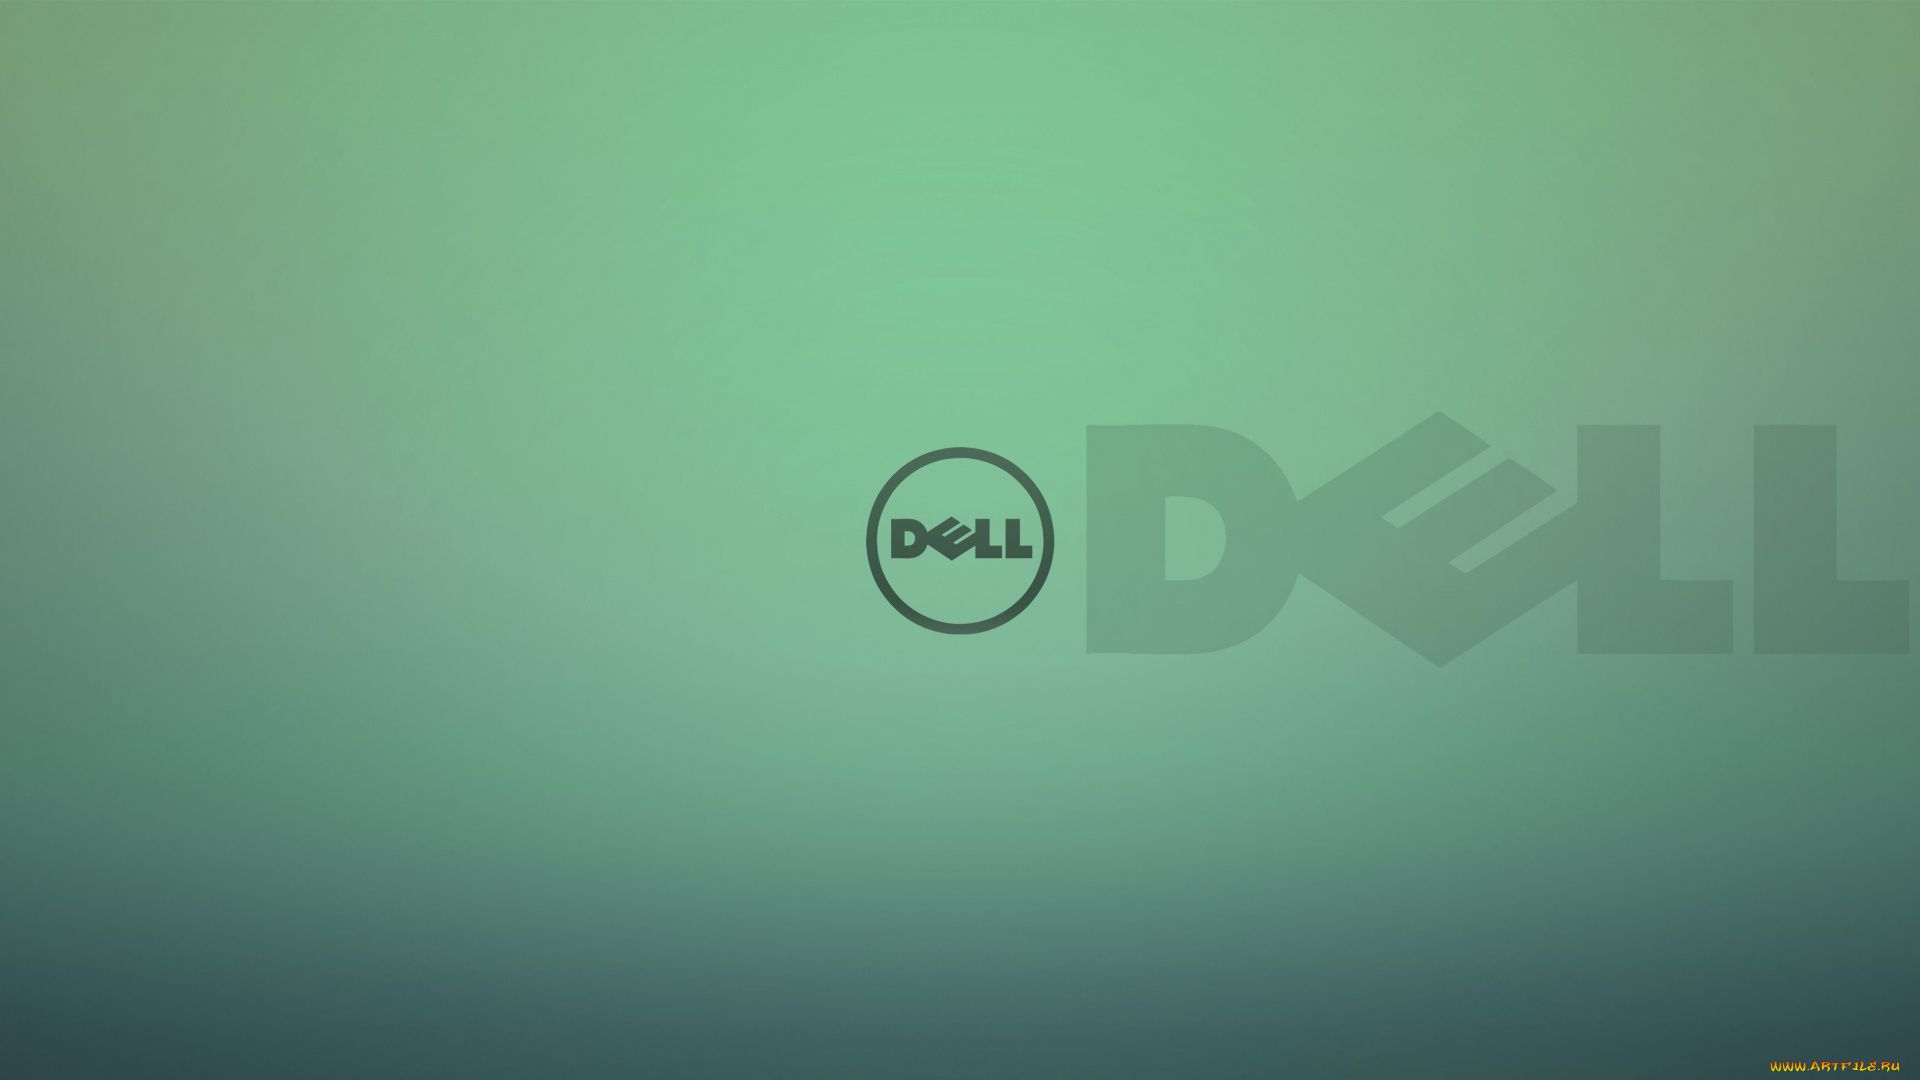 Dell background picture hd